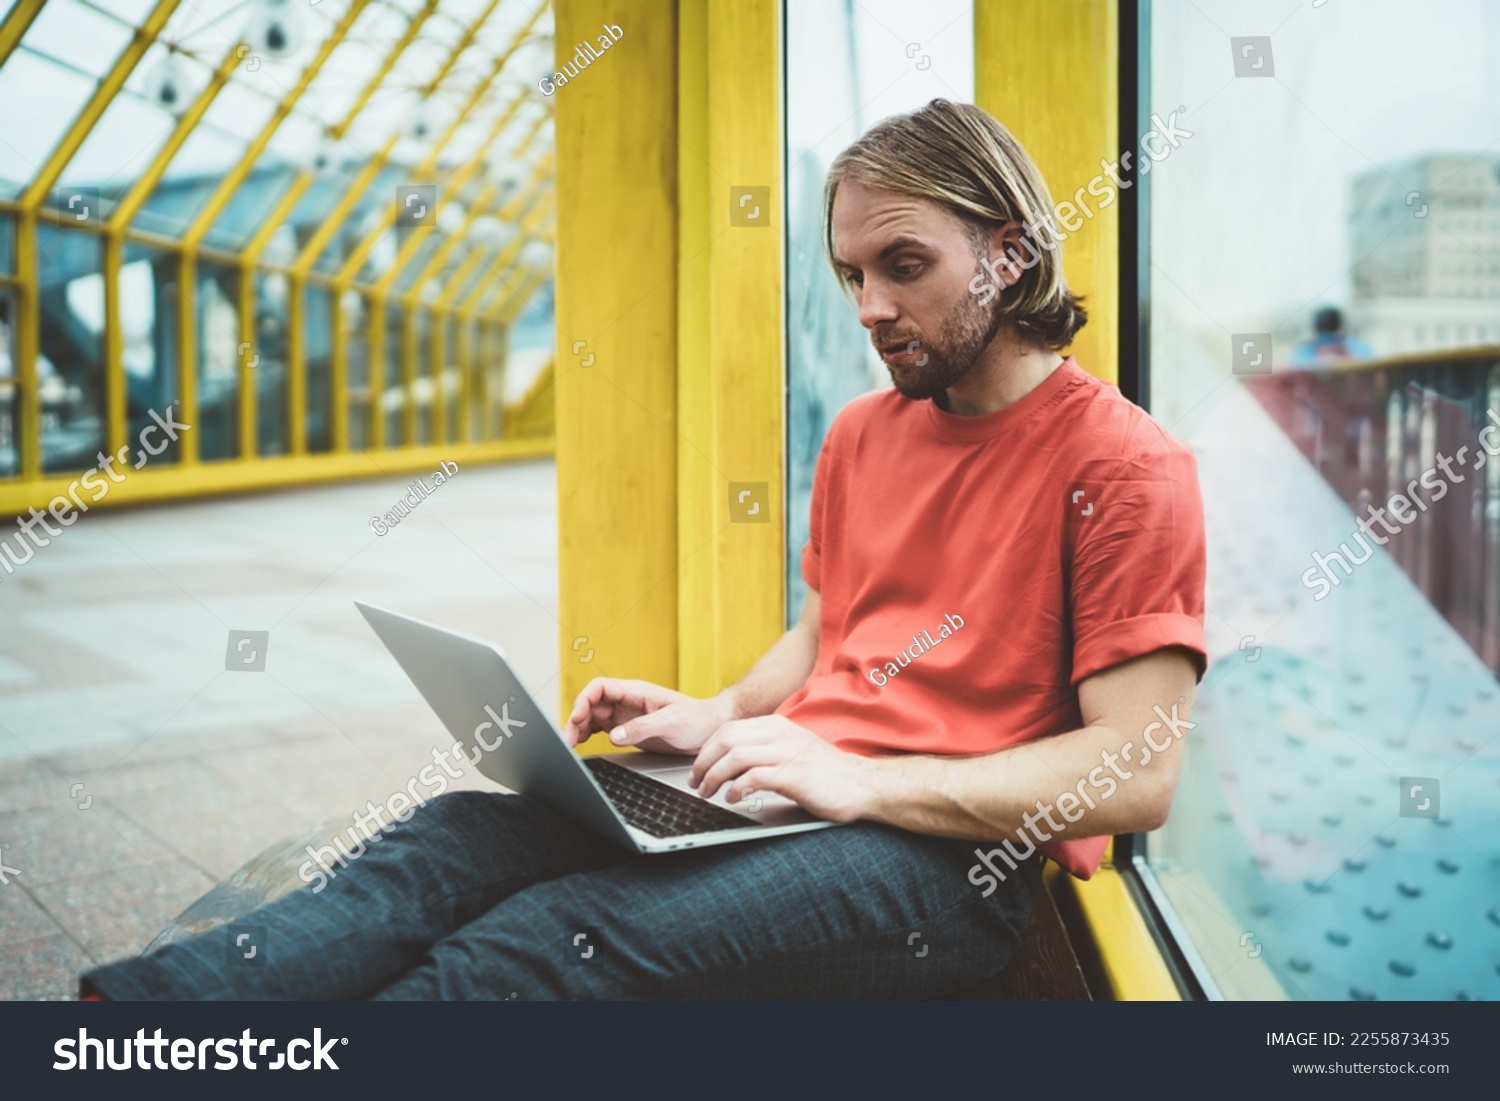 Surprised thoughtful freelancer in casual wear working on startup using laptop looking for decision of problem in covered pedestrian bridge #2255873435